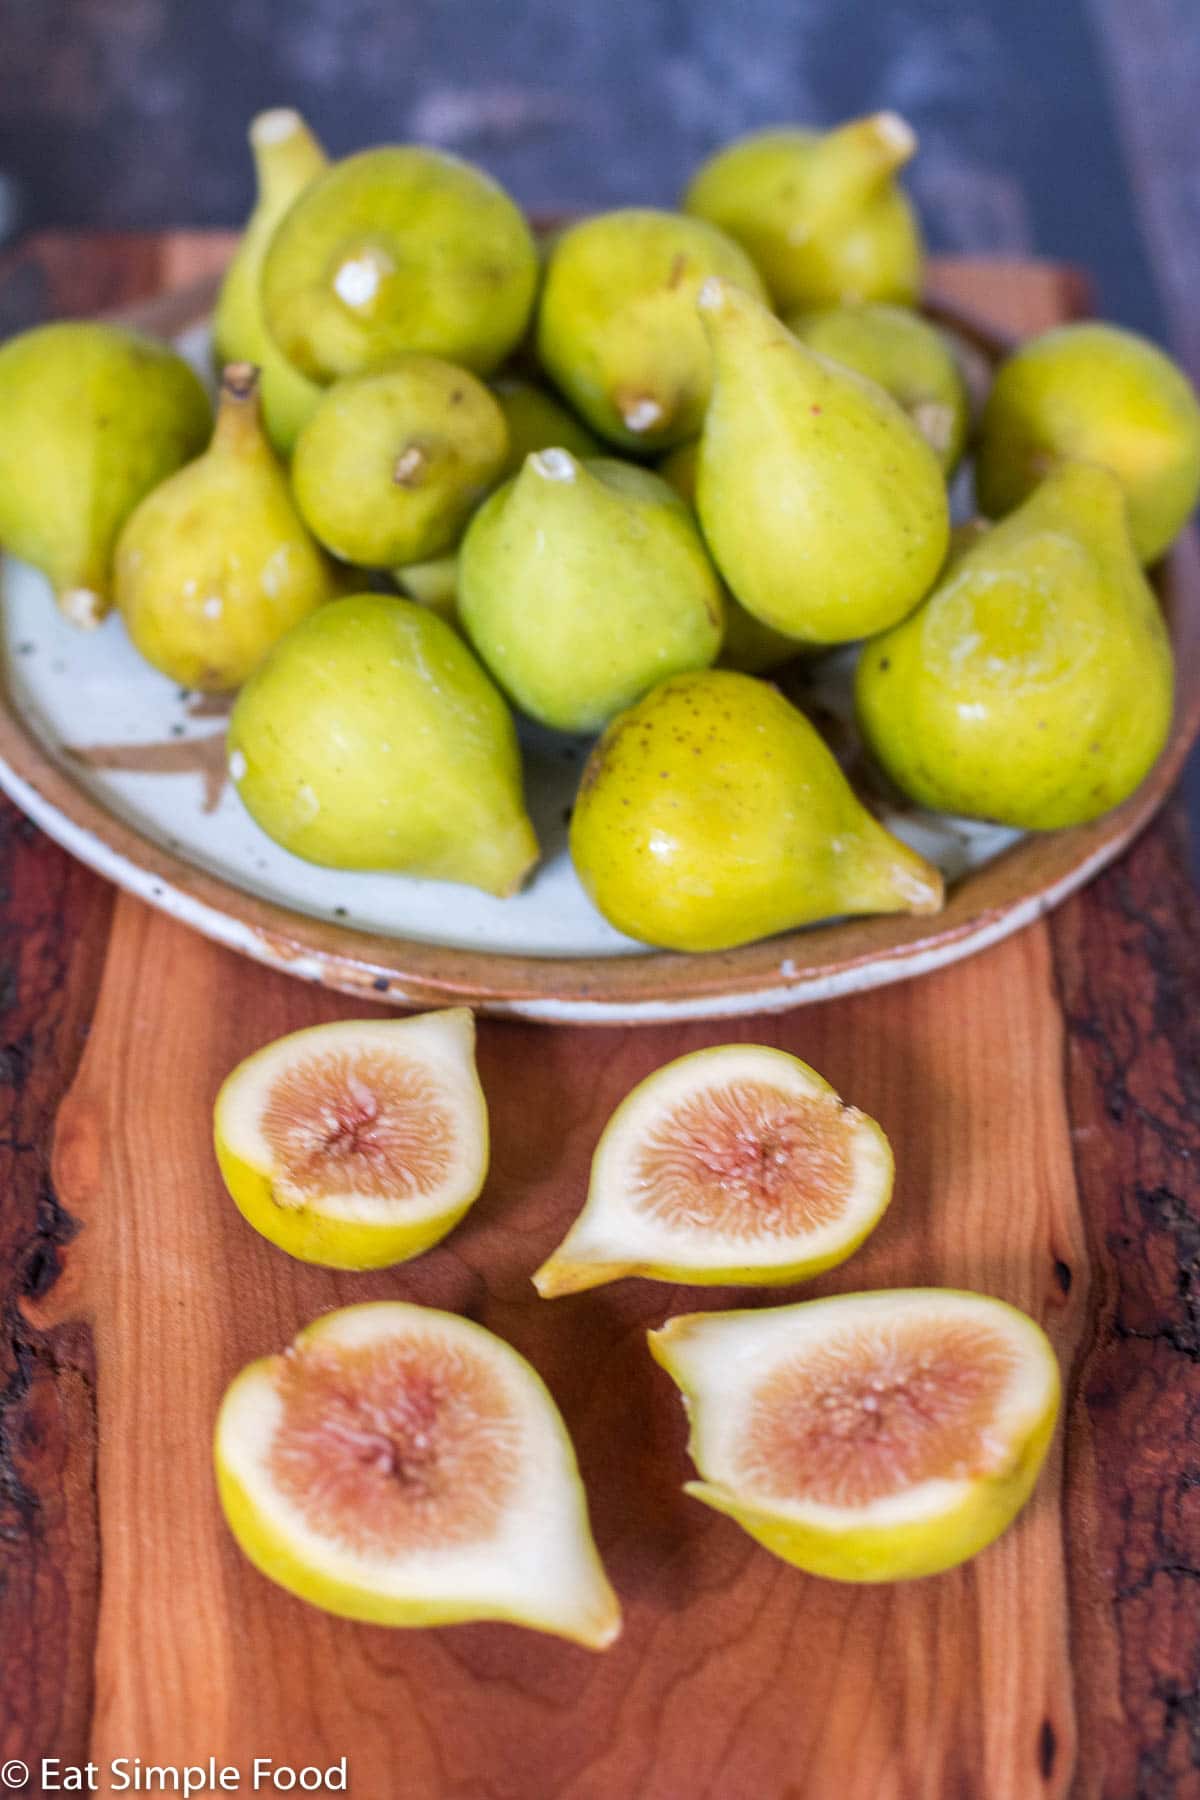 Plate of Yellow Green Figs on a cutting board with 2 figs cut in half. Side view.